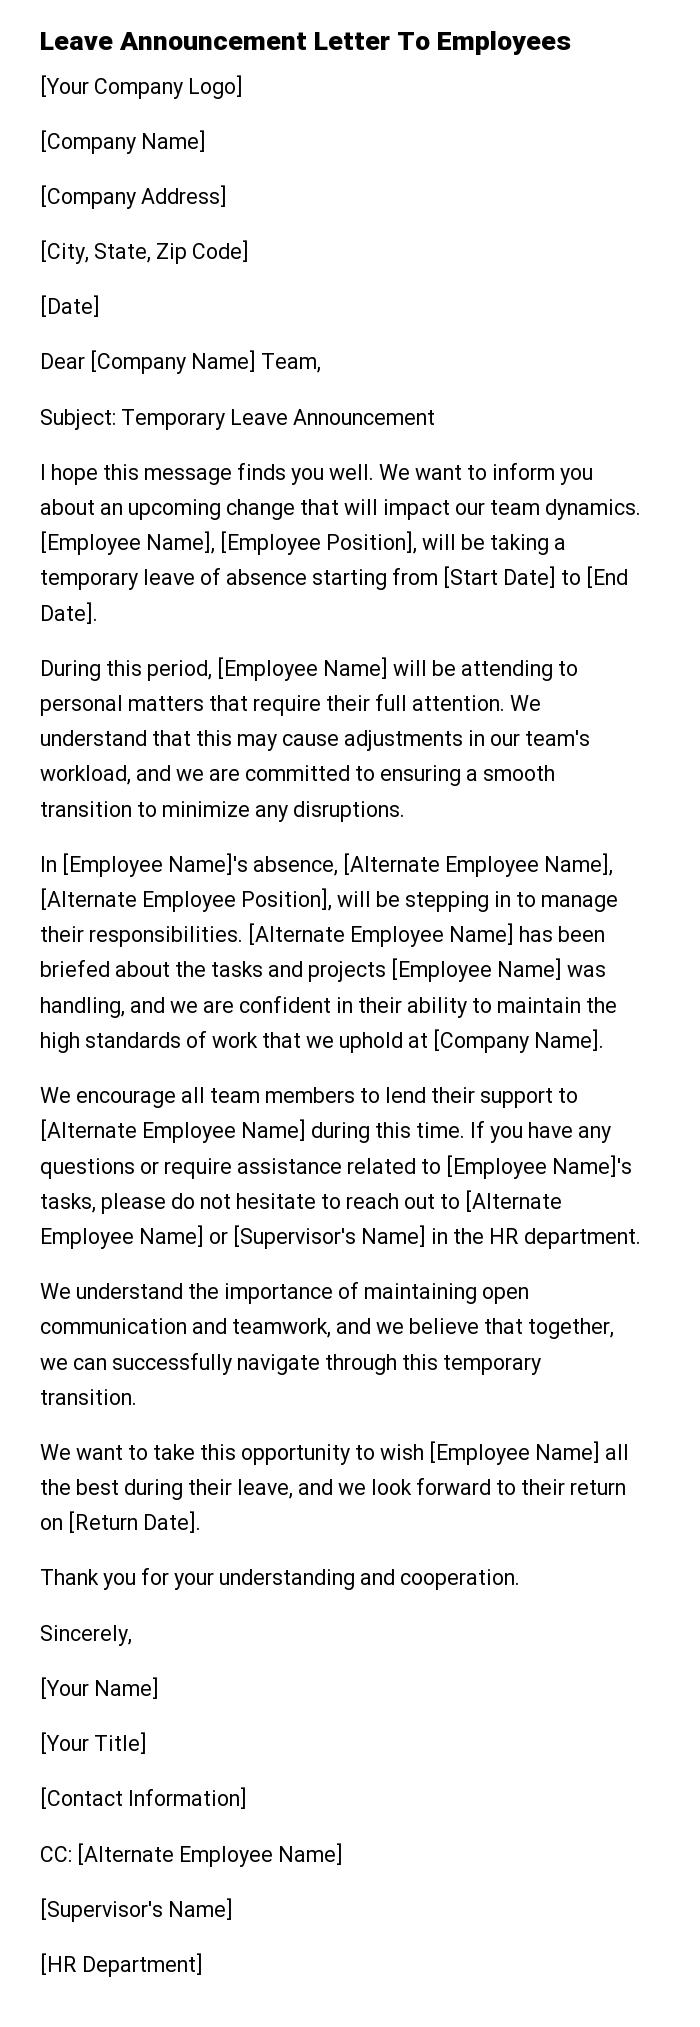 Leave Announcement Letter To Employees